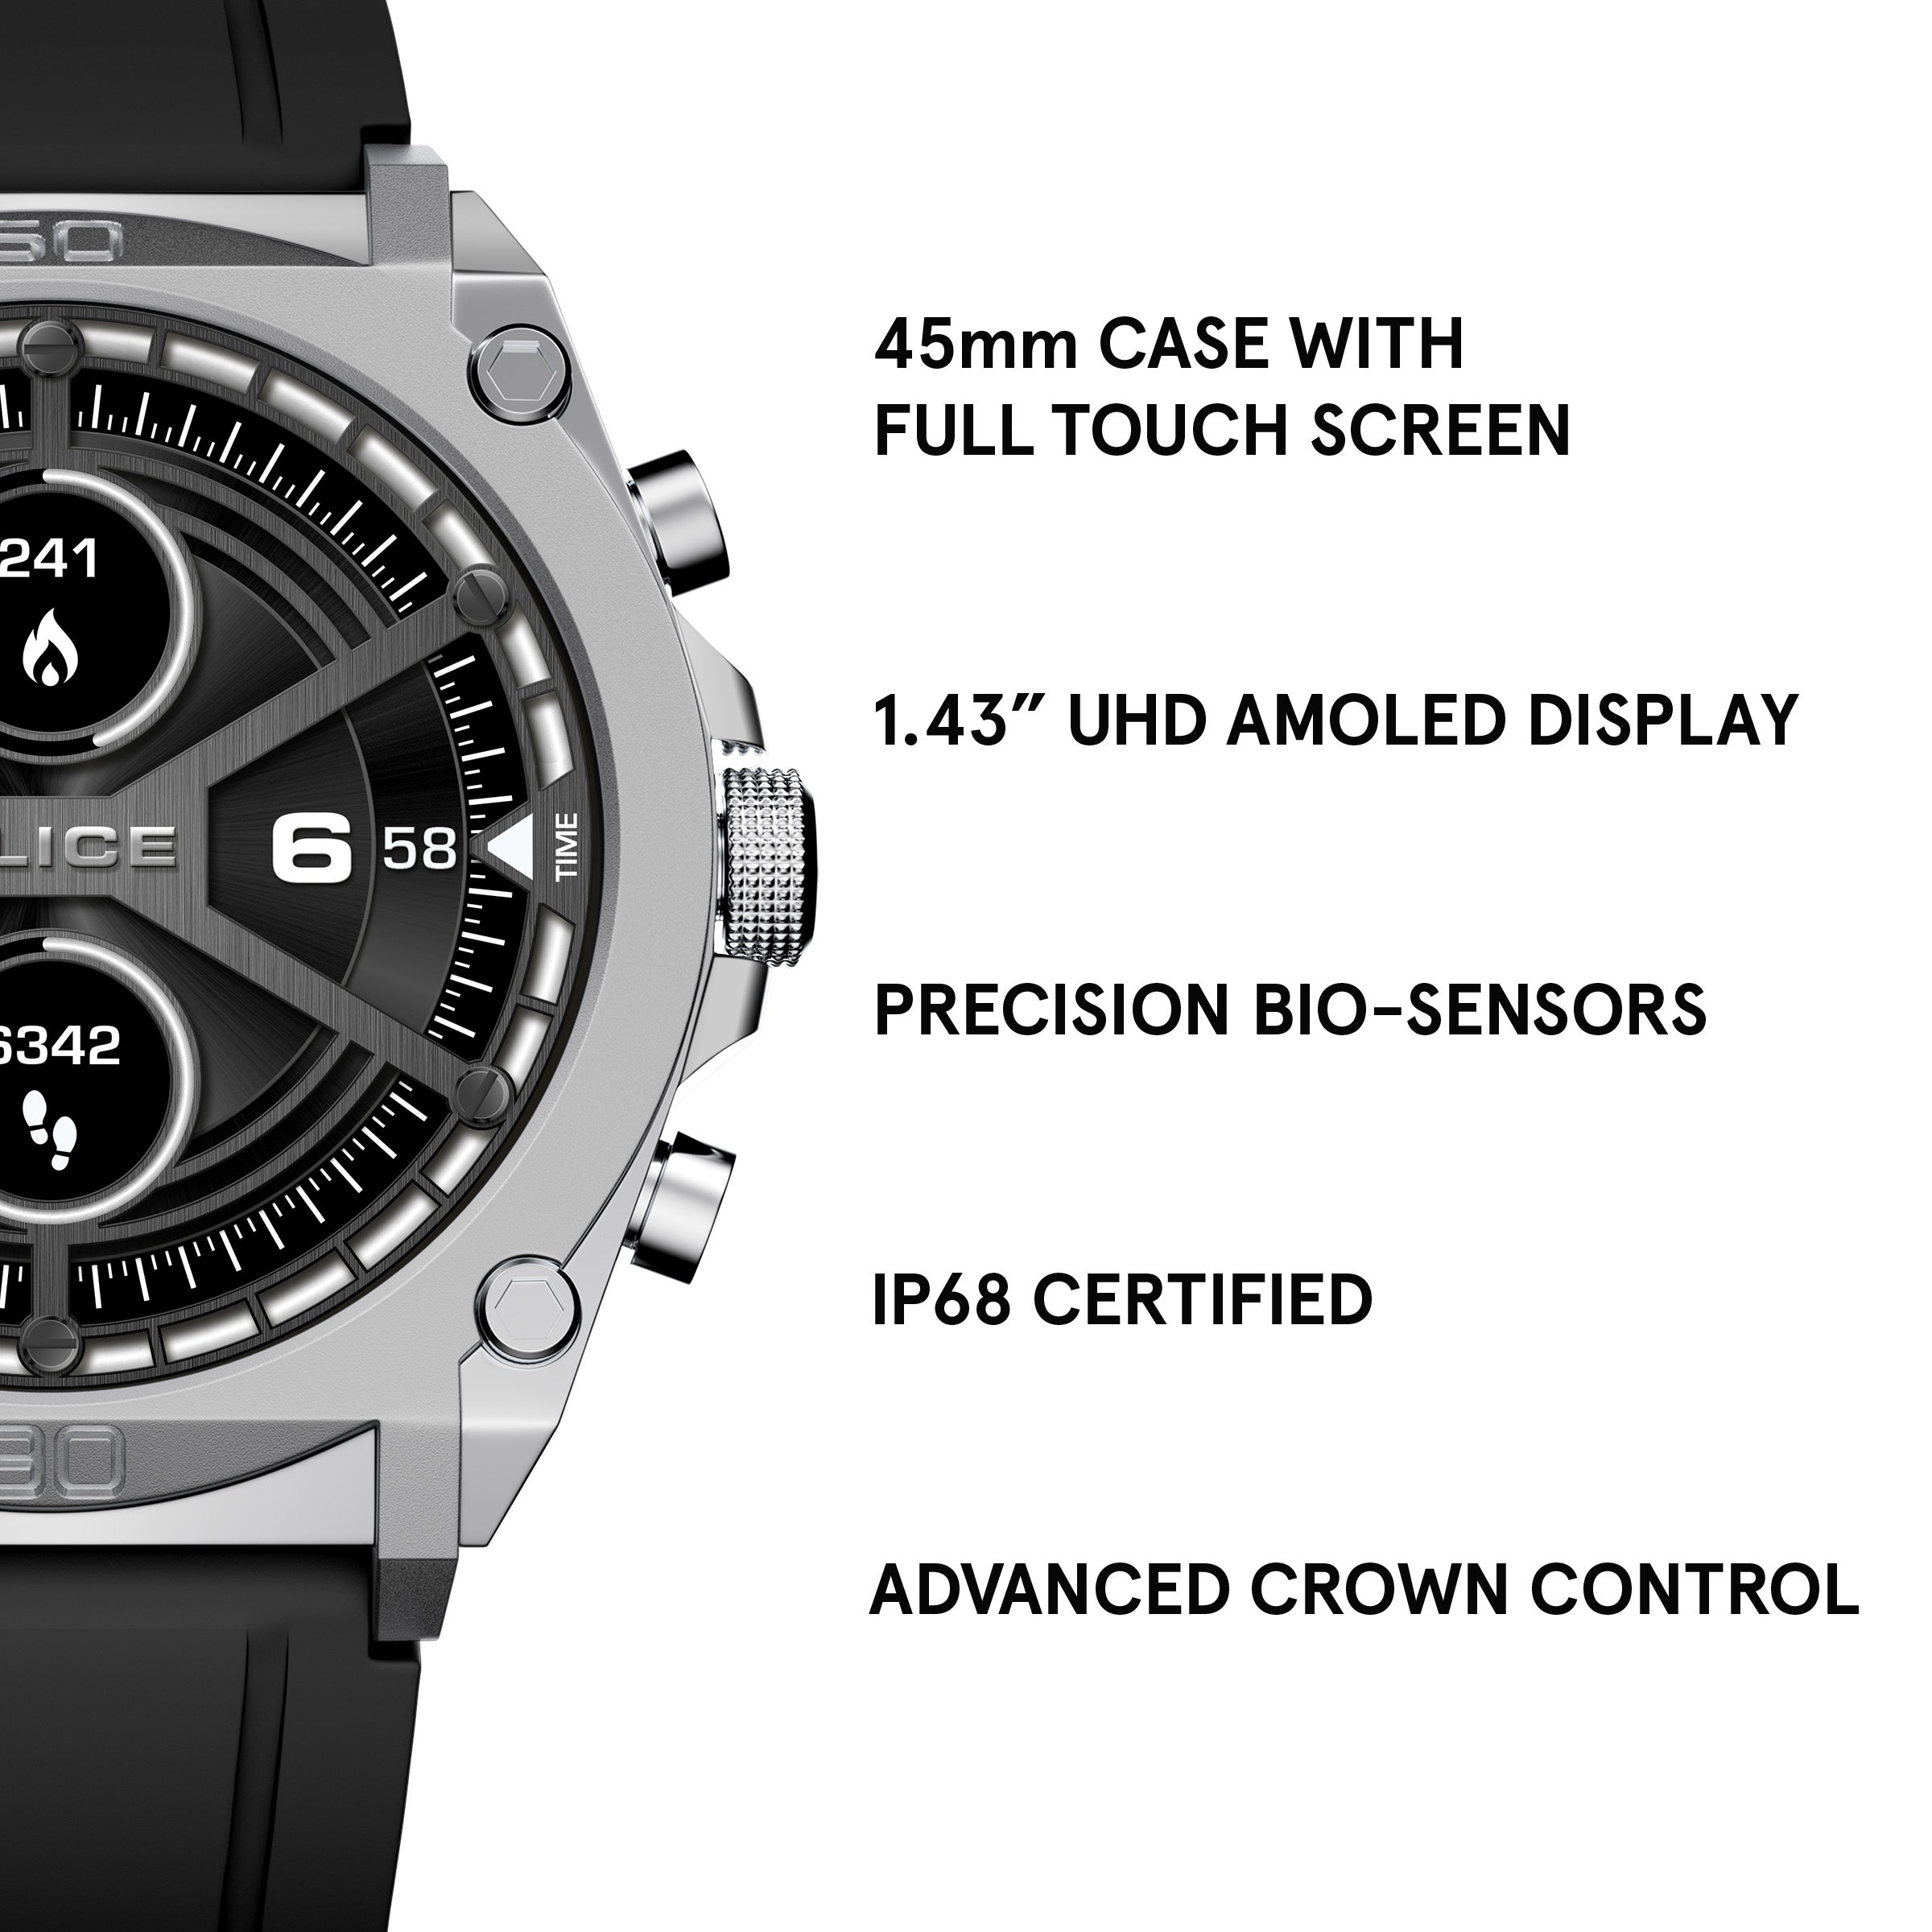 Police Freedom of Time My Avatar Steel Smartwatch